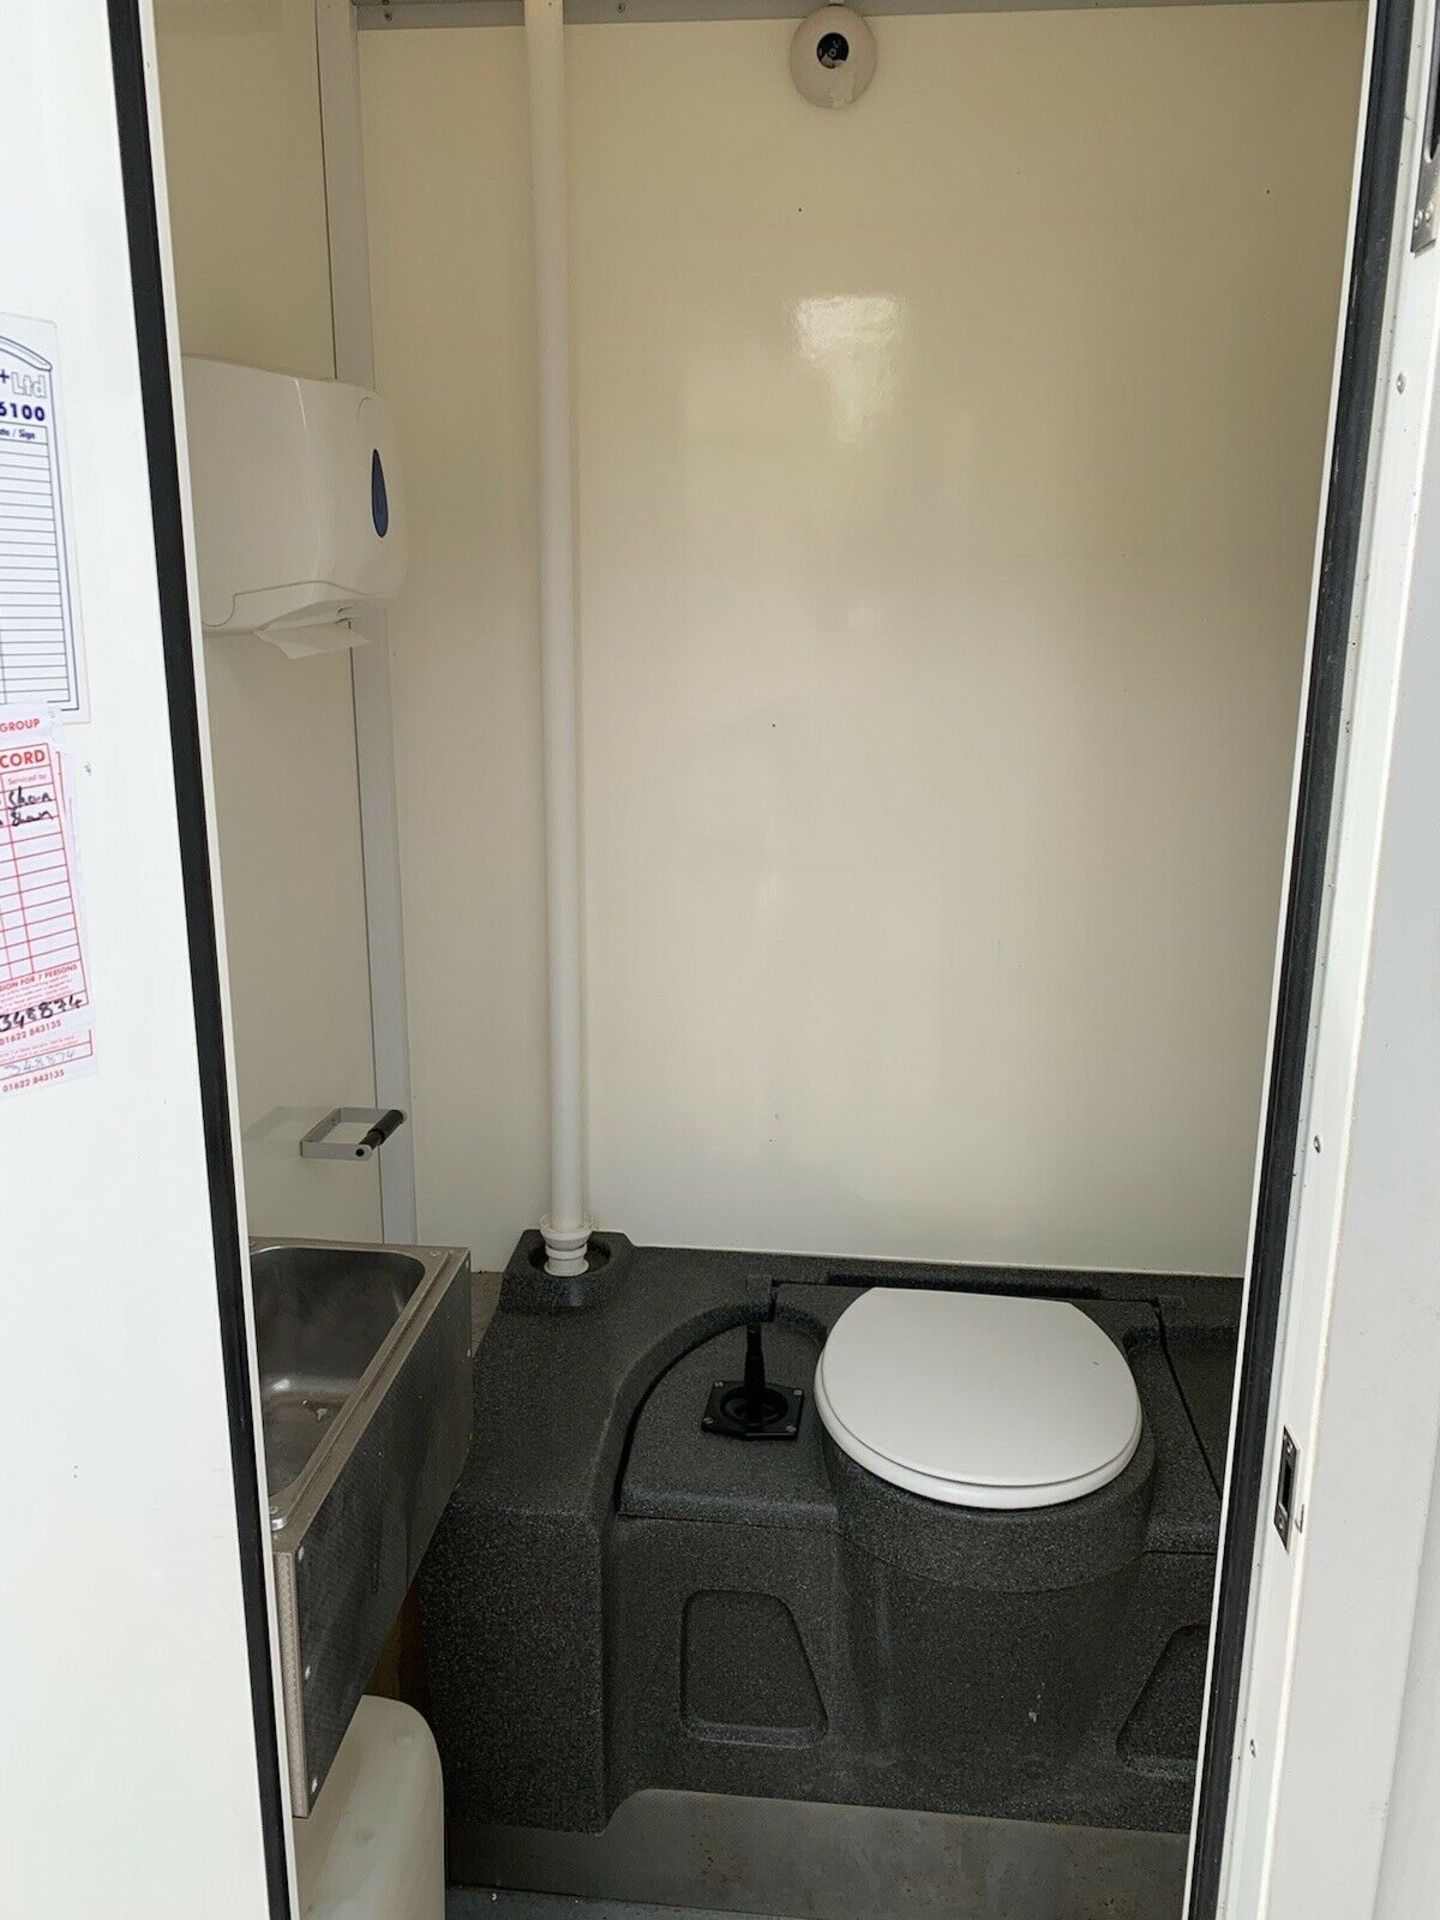 AJC Towable Welfare Unit Site Office Cabin Canteen Toilet Generator Groundhog - Image 9 of 11